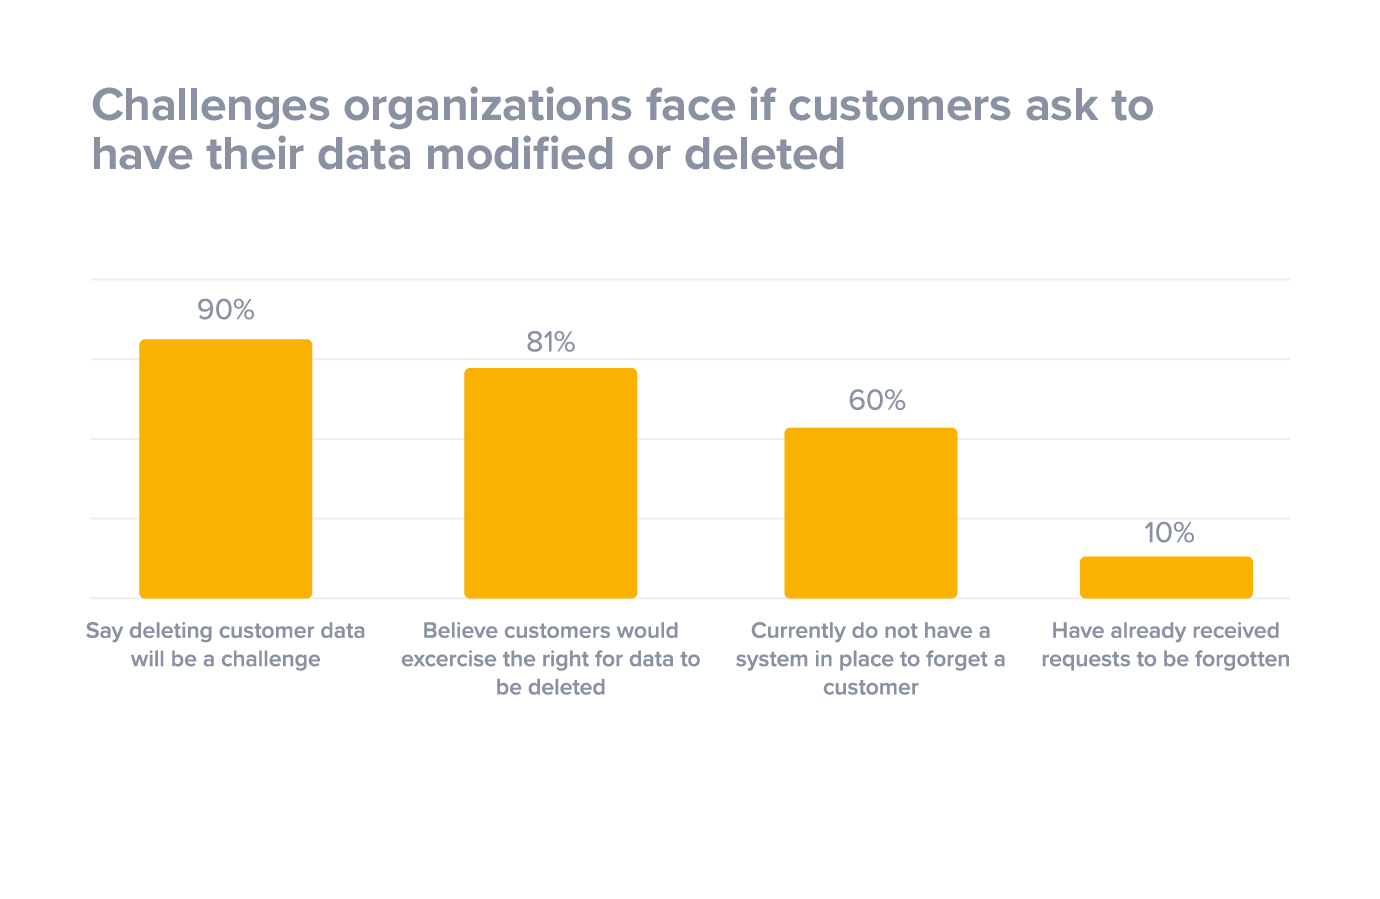 Challenges organizations face if customers ask to have their data modified or deleted